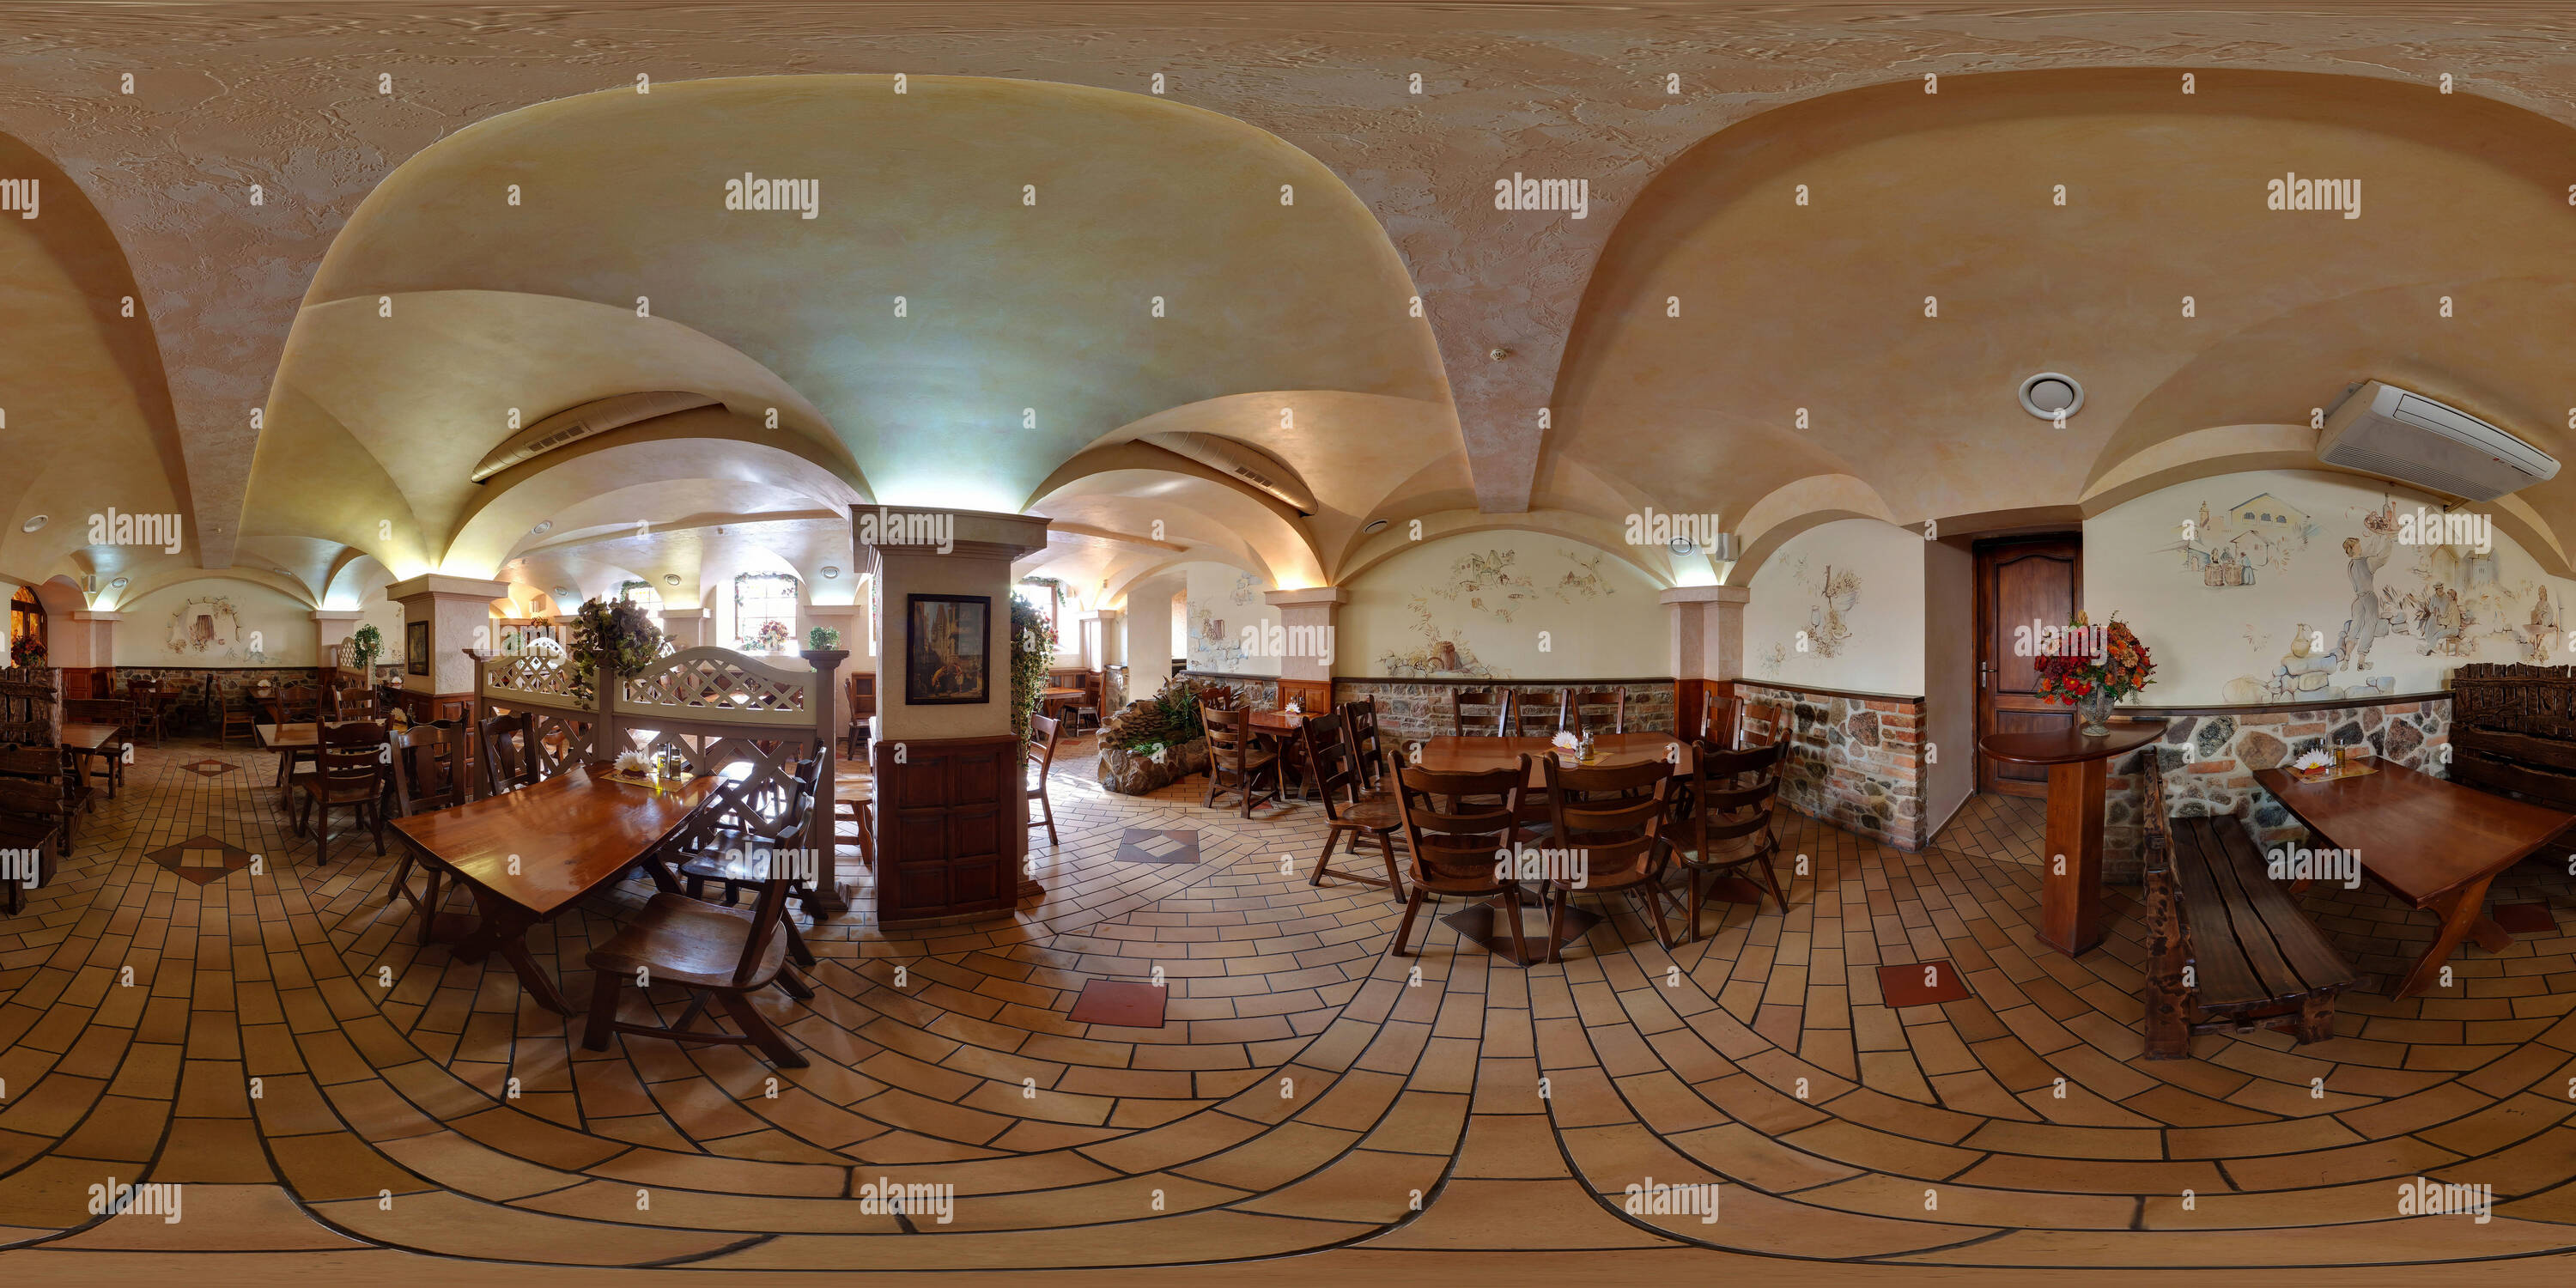 360 degree panoramic view of GRODNO, BELARUS - NOVEMBER 13, 2011: Full spherical 360 degrees panorama in equirectangular equidistant projection, panorama in interior of vintage ca